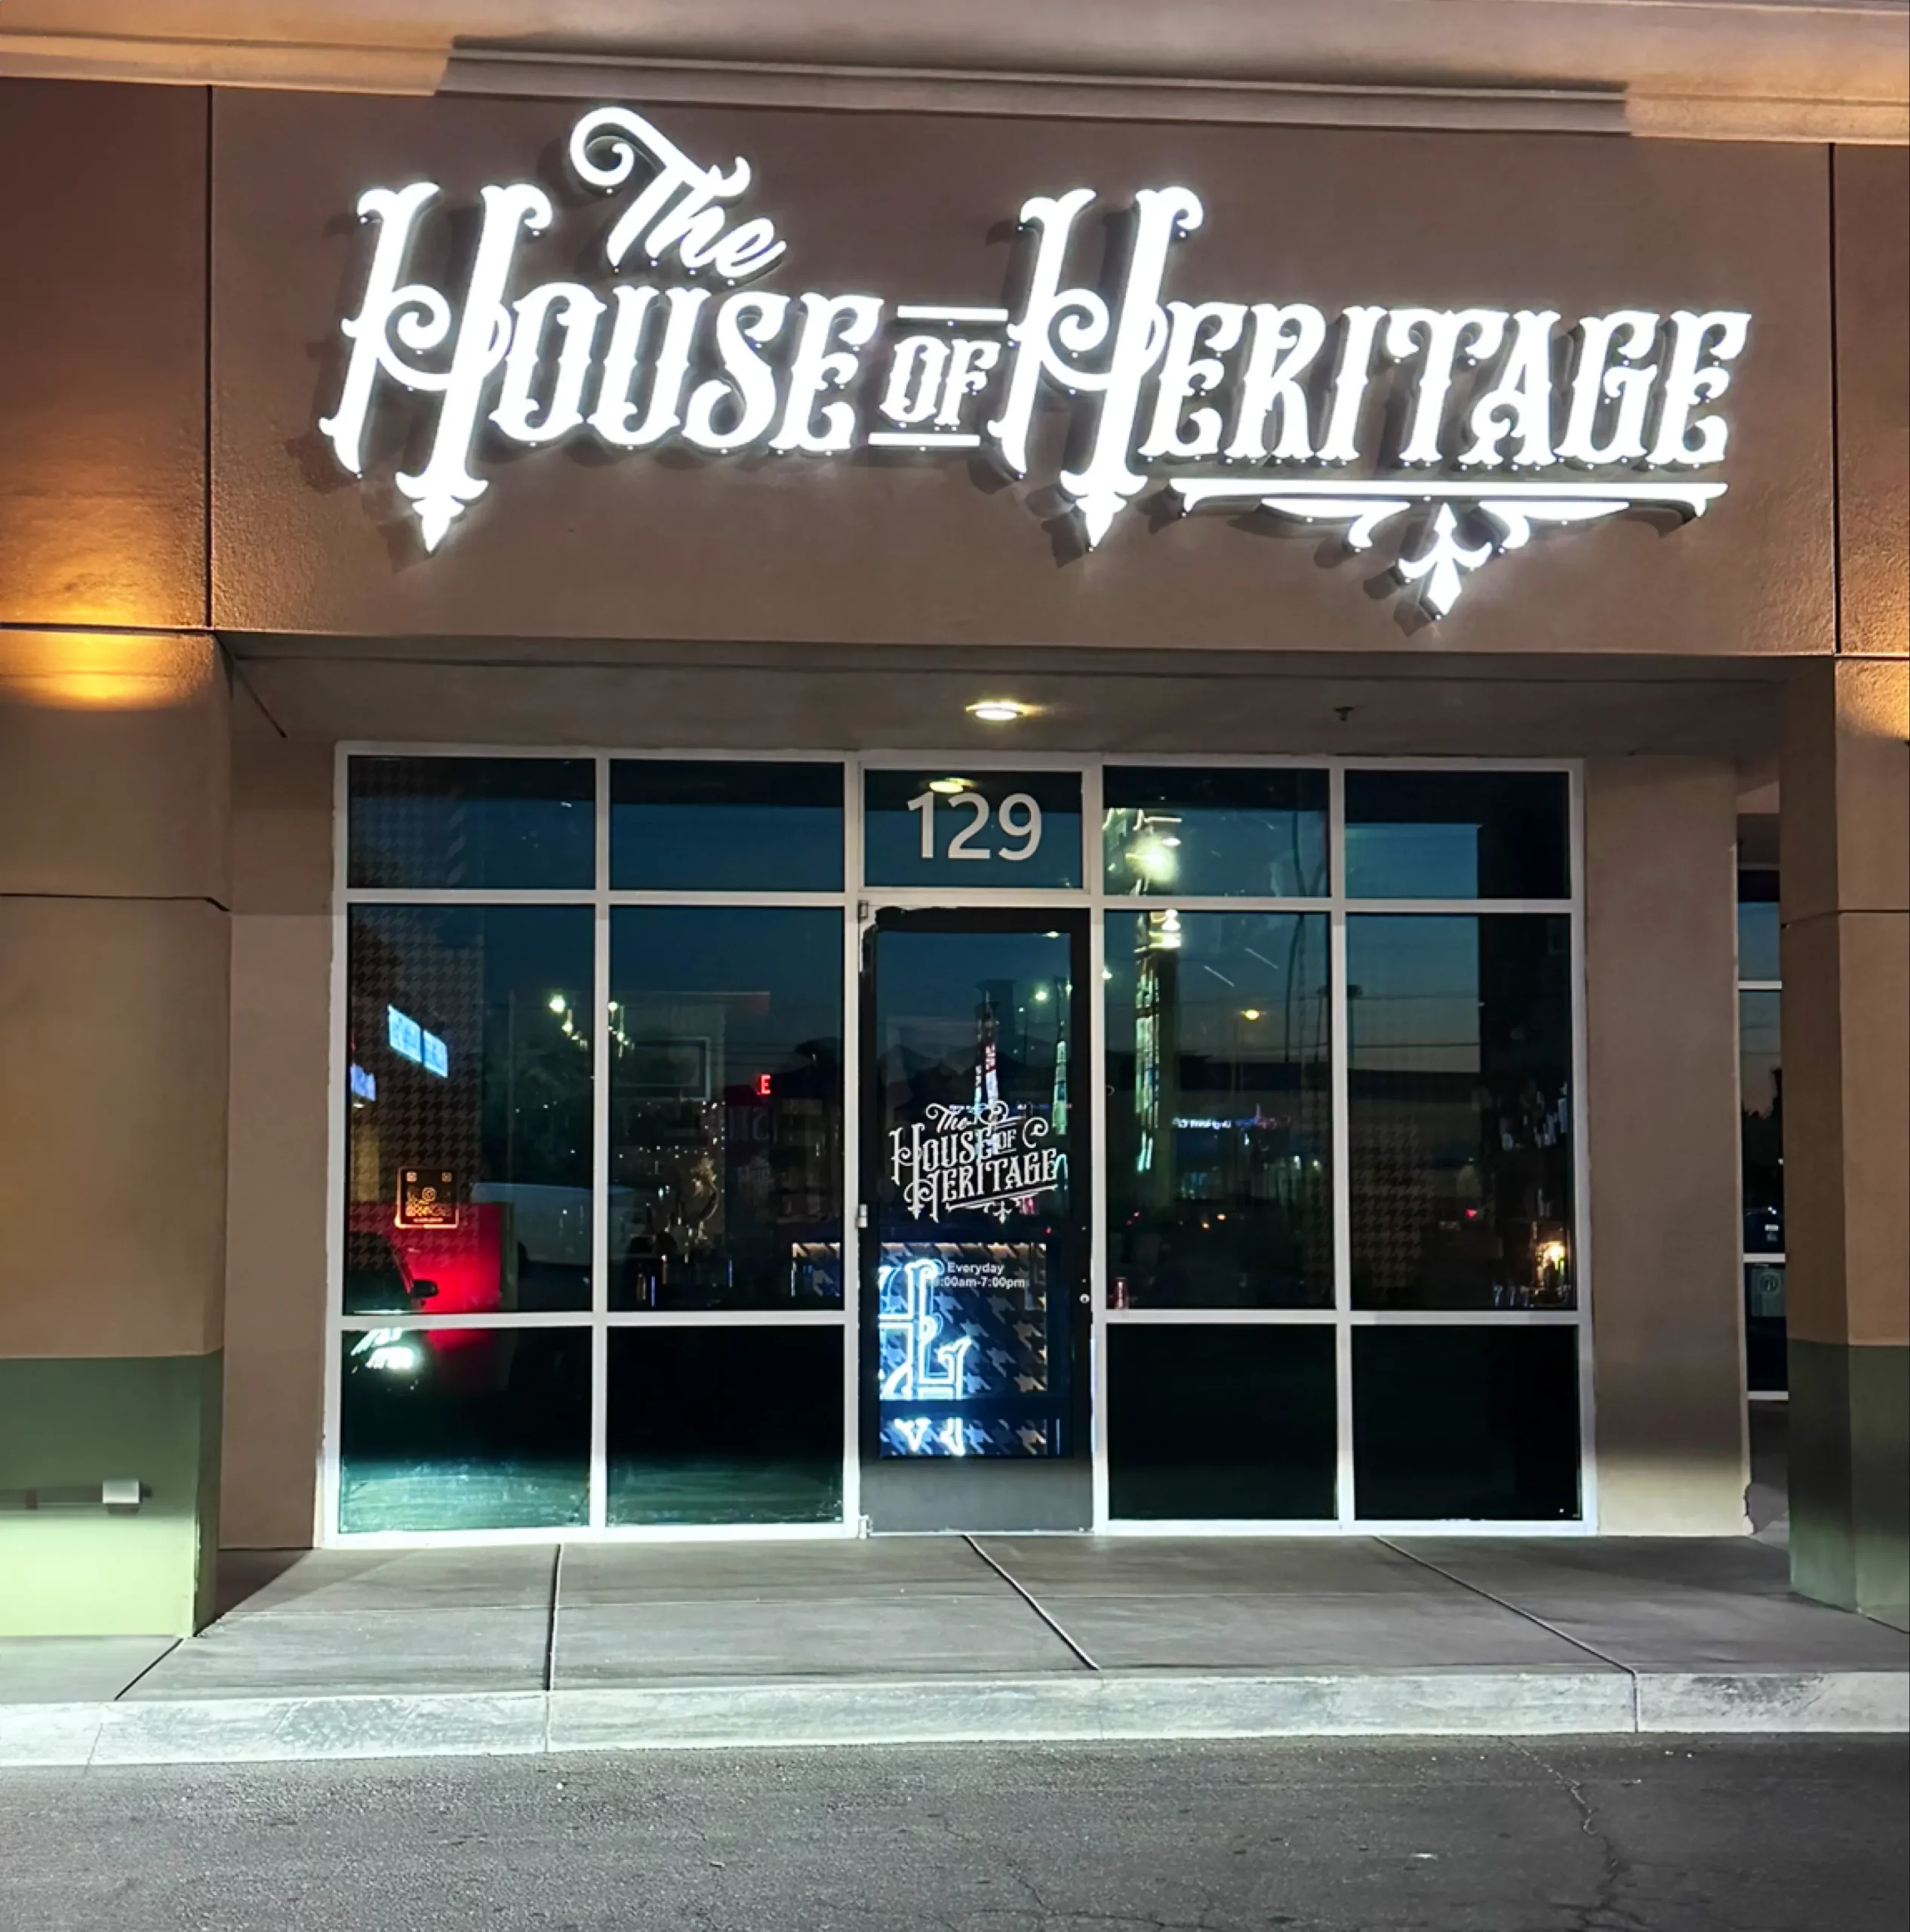 Desert Dapper Cuts The House of Heritage